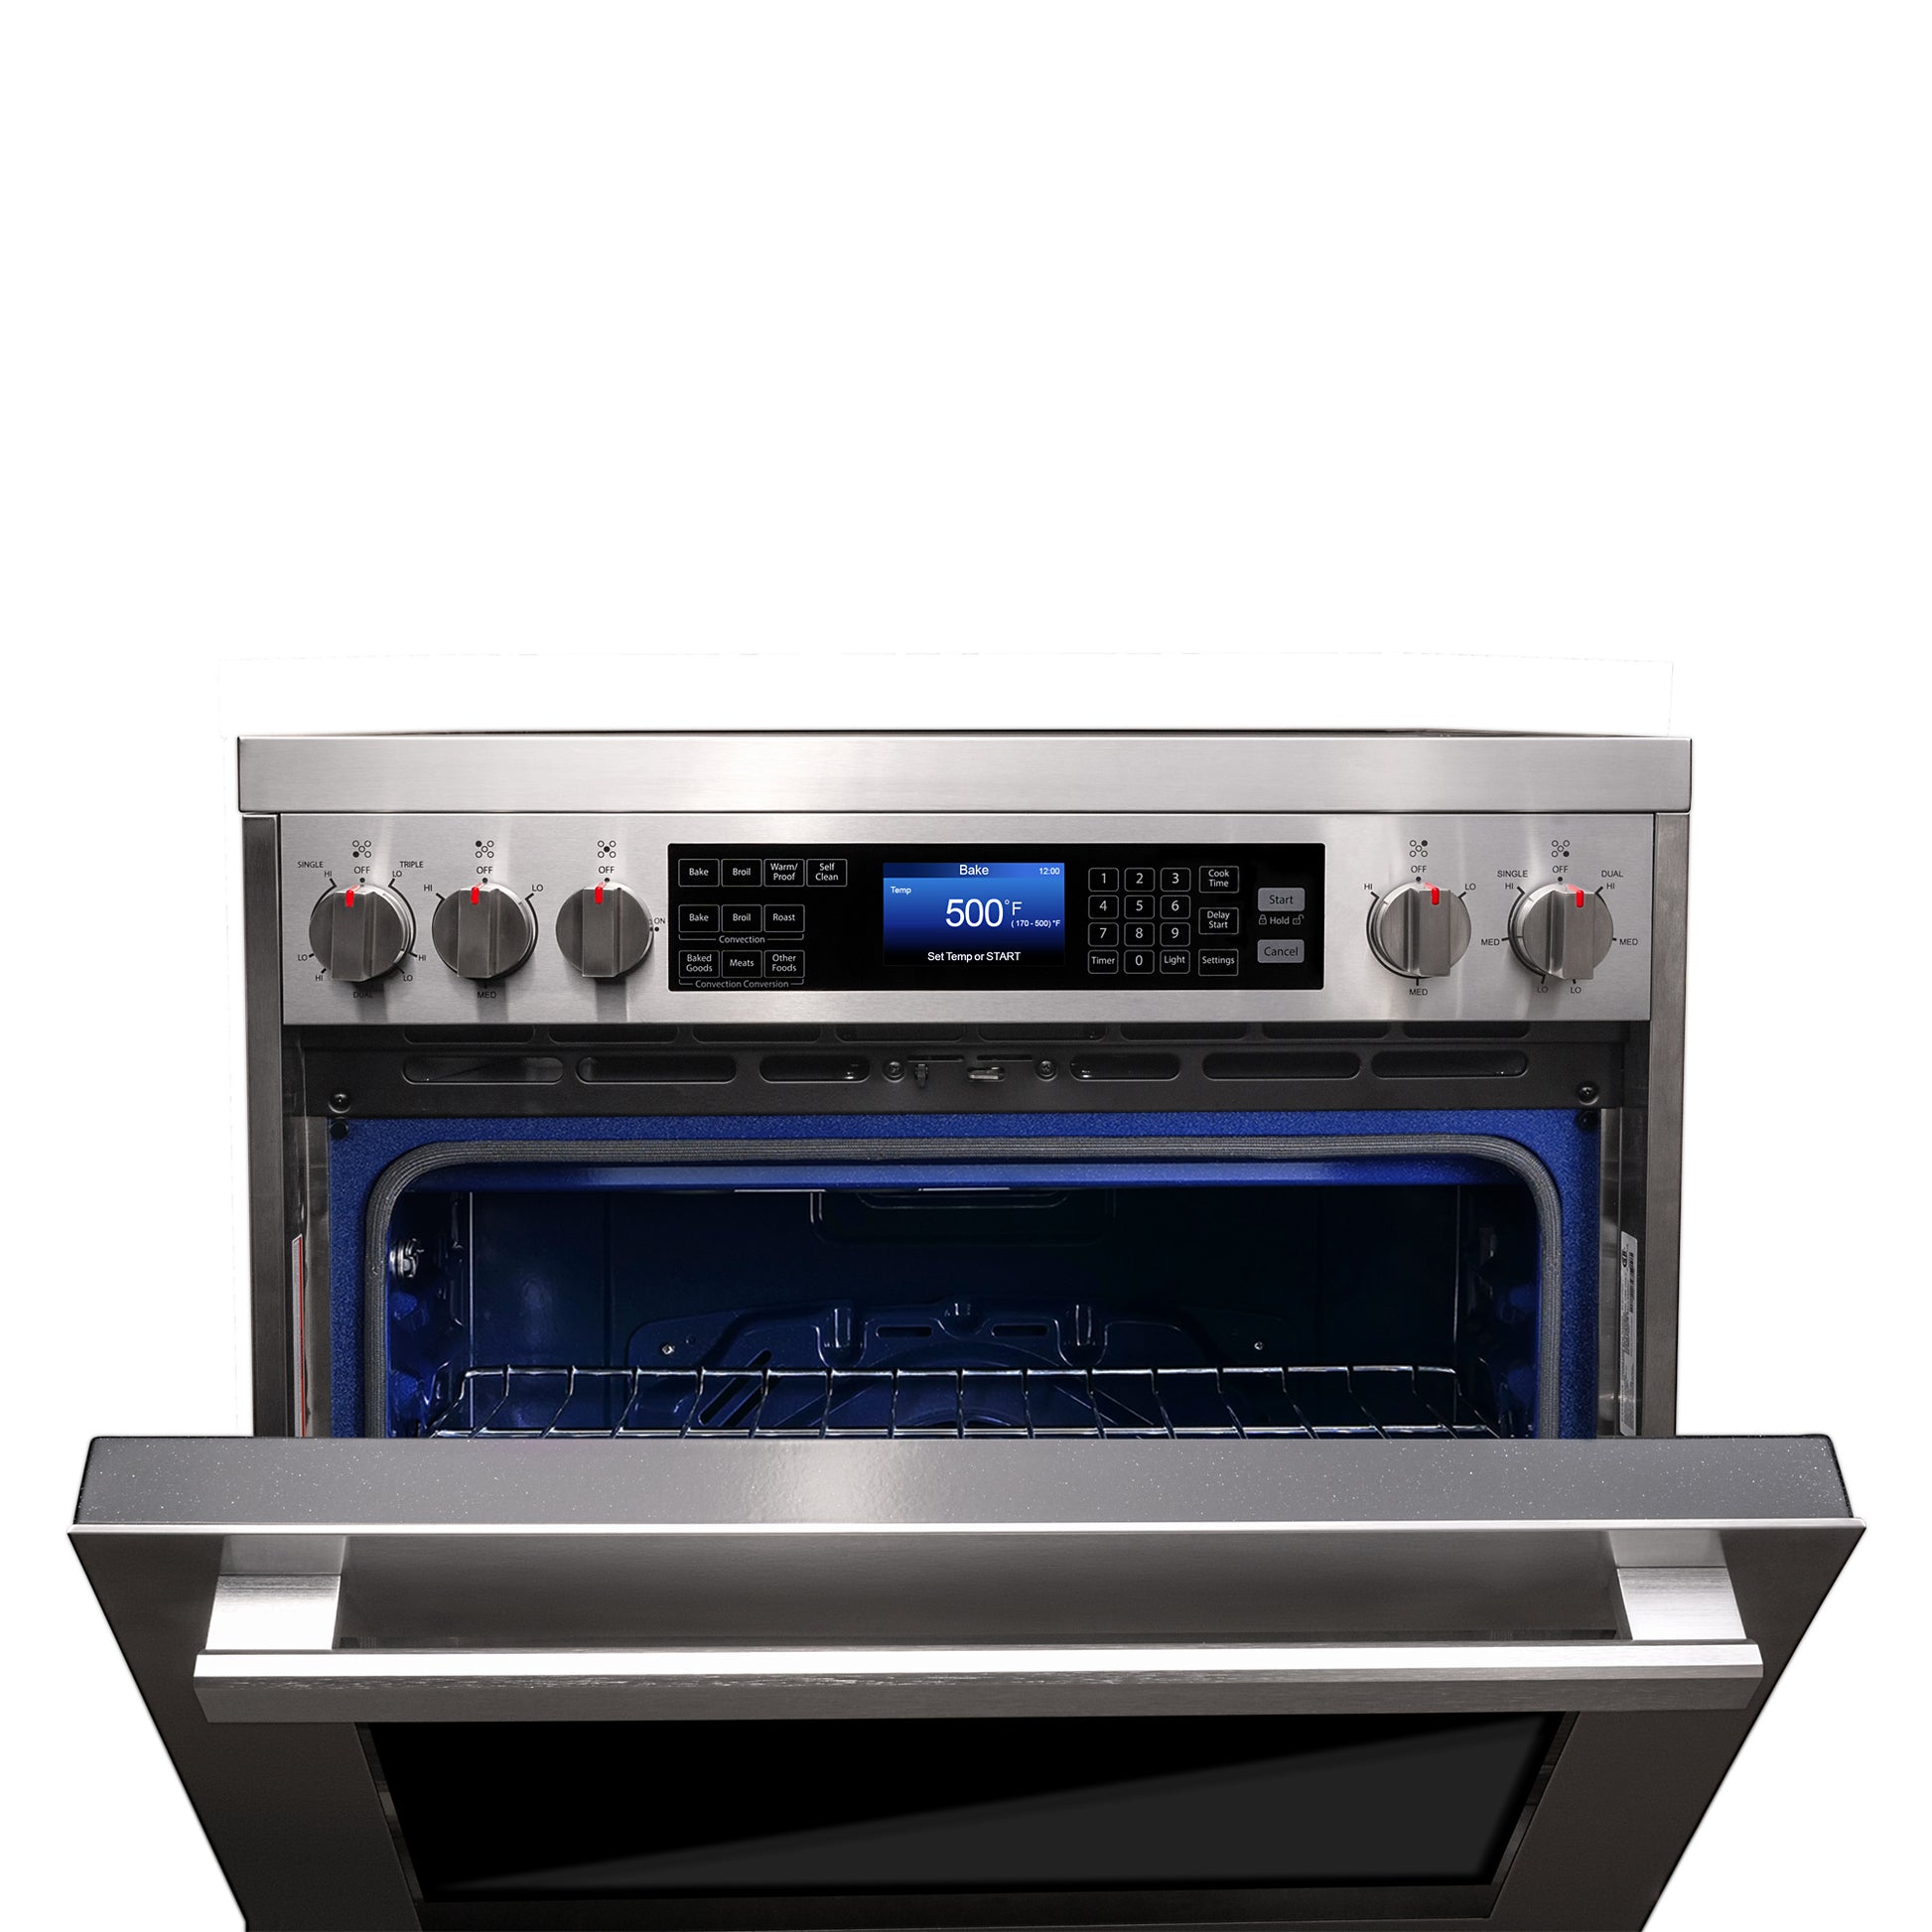 Cosmo Commercial-Style 30 in 5 cu. ft. Single Oven Electric Range in Stainless Steel with 7 Function Convection Oven